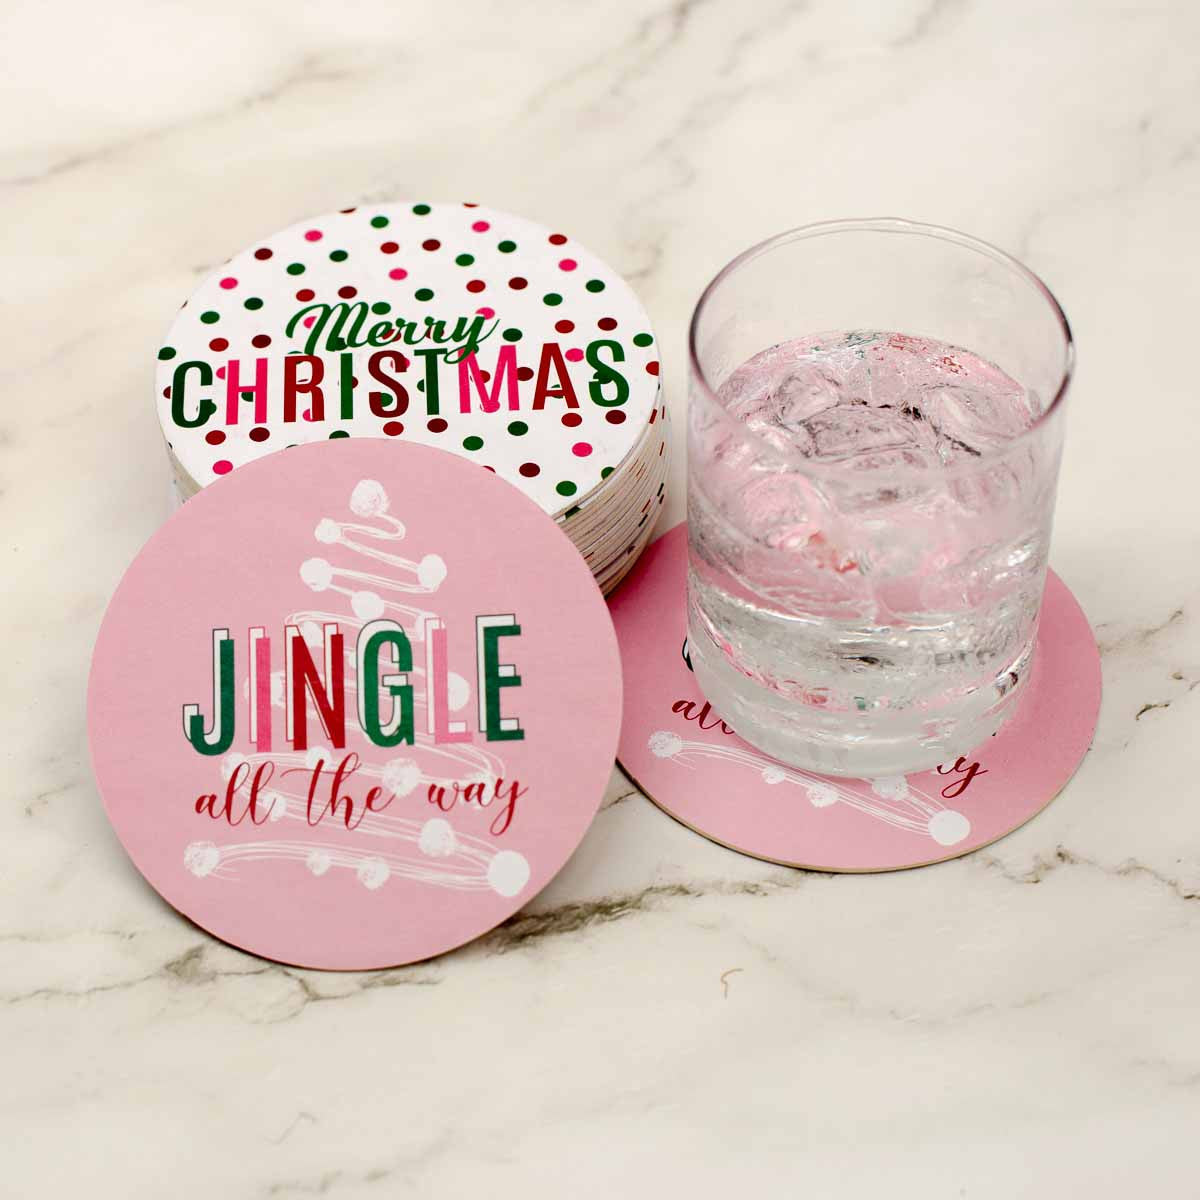 Christmas Time Is Here Coasters | DOORBUSTERS-Coaster-The Royal Standard-The Village Shoppe, Women’s Fashion Boutique, Shop Online and In Store - Located in Muscle Shoals, AL.